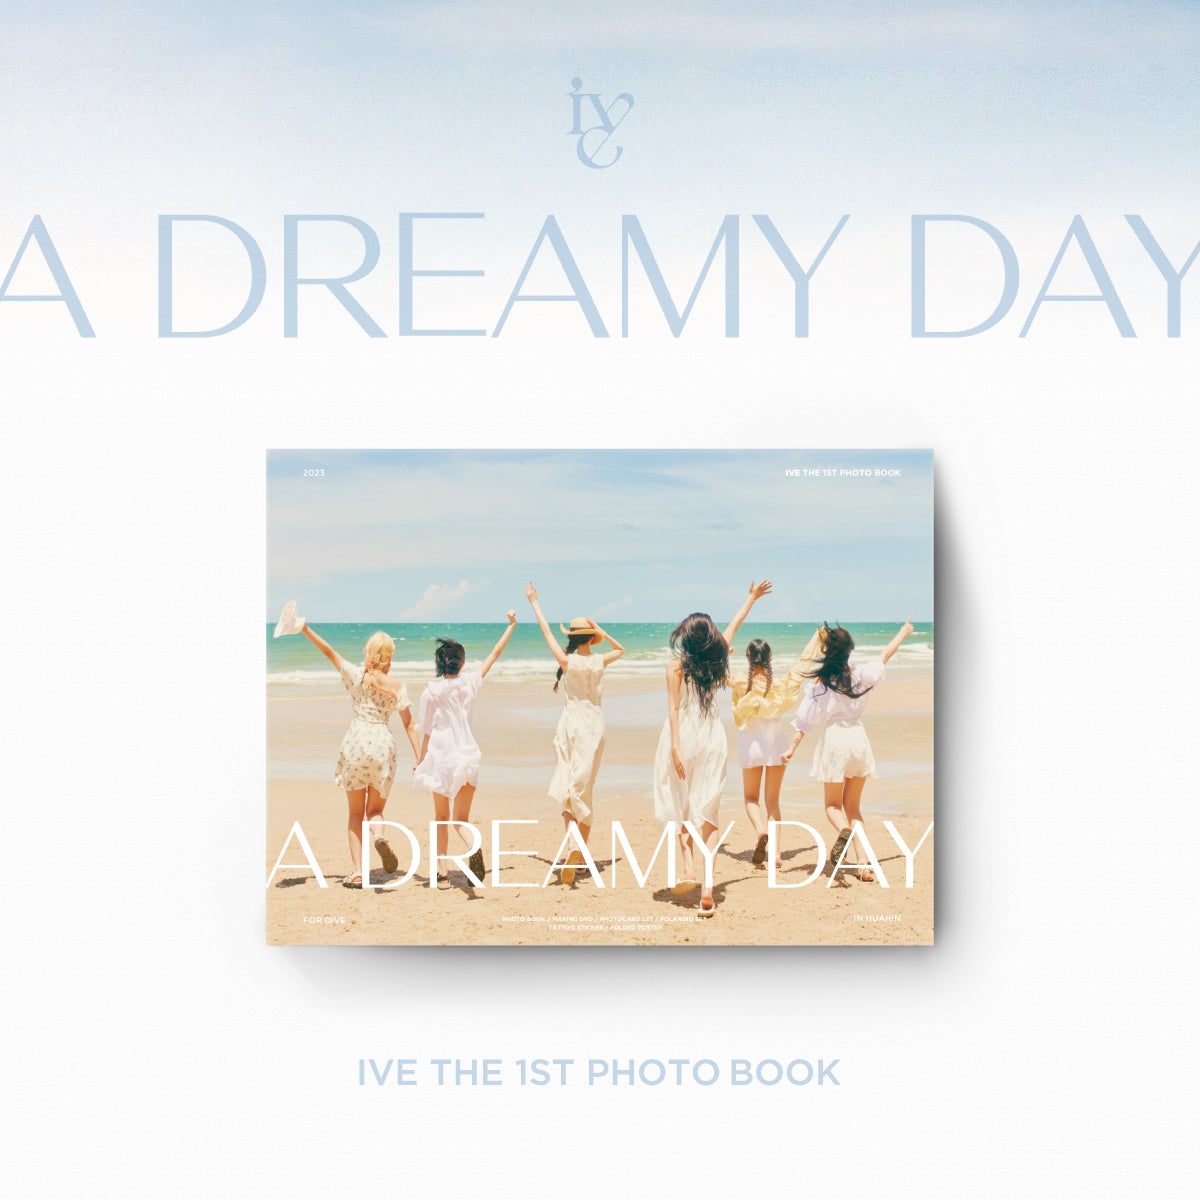 IVE - THE 1ST PHOTO BOOK 'A DREAMY DAY'